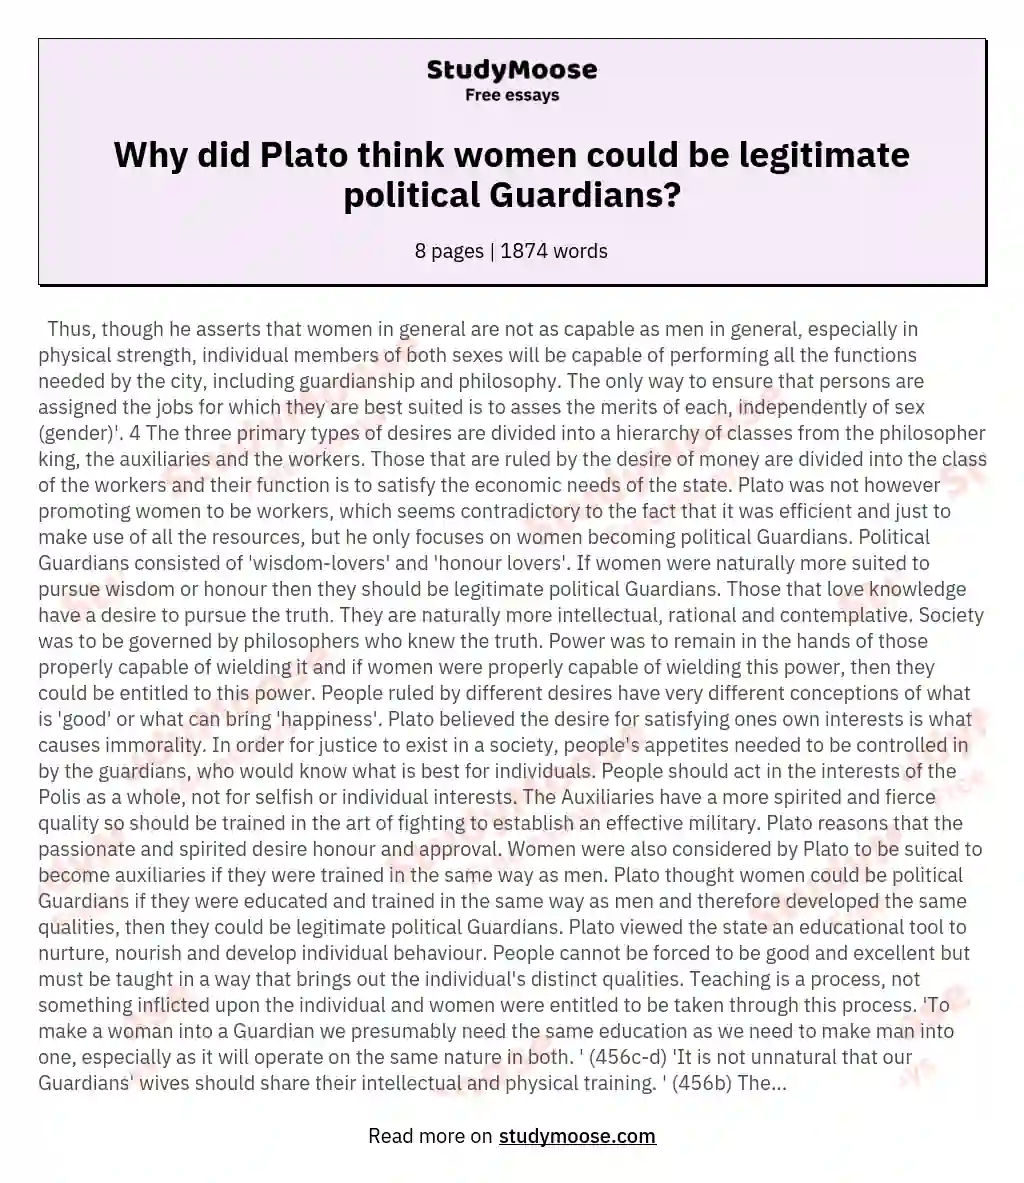 Why did Plato think women could be legitimate political Guardians?